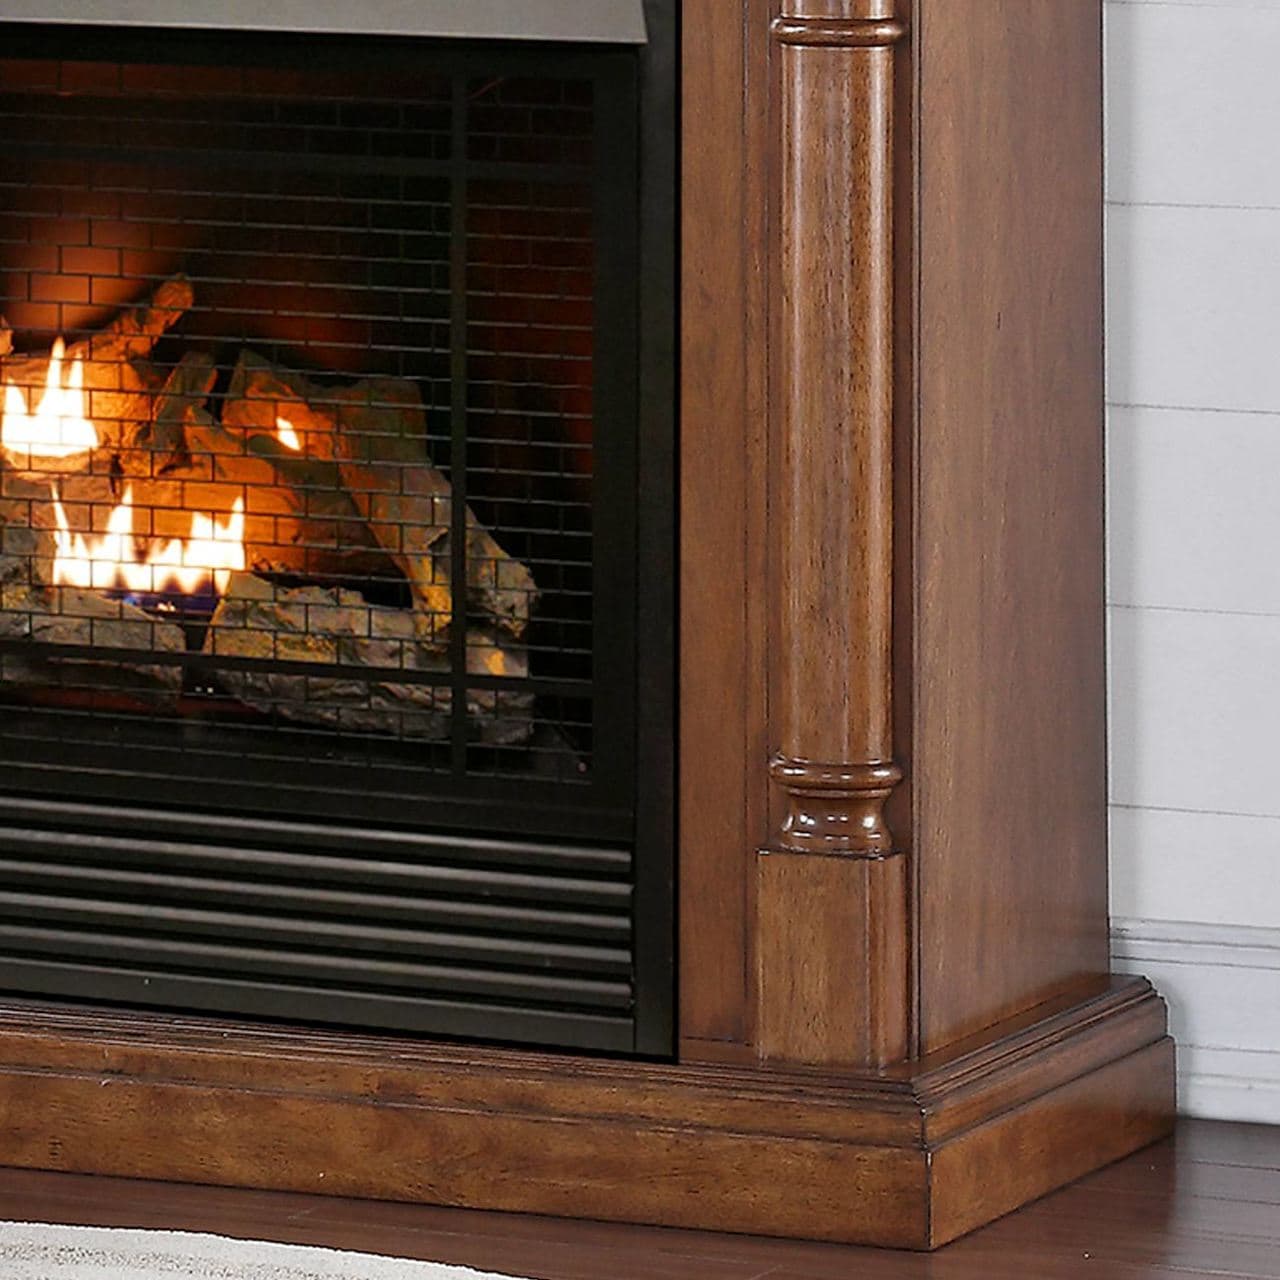 Gas Fireplaces and Gas Inserts, Waltz & Sons, Inc.